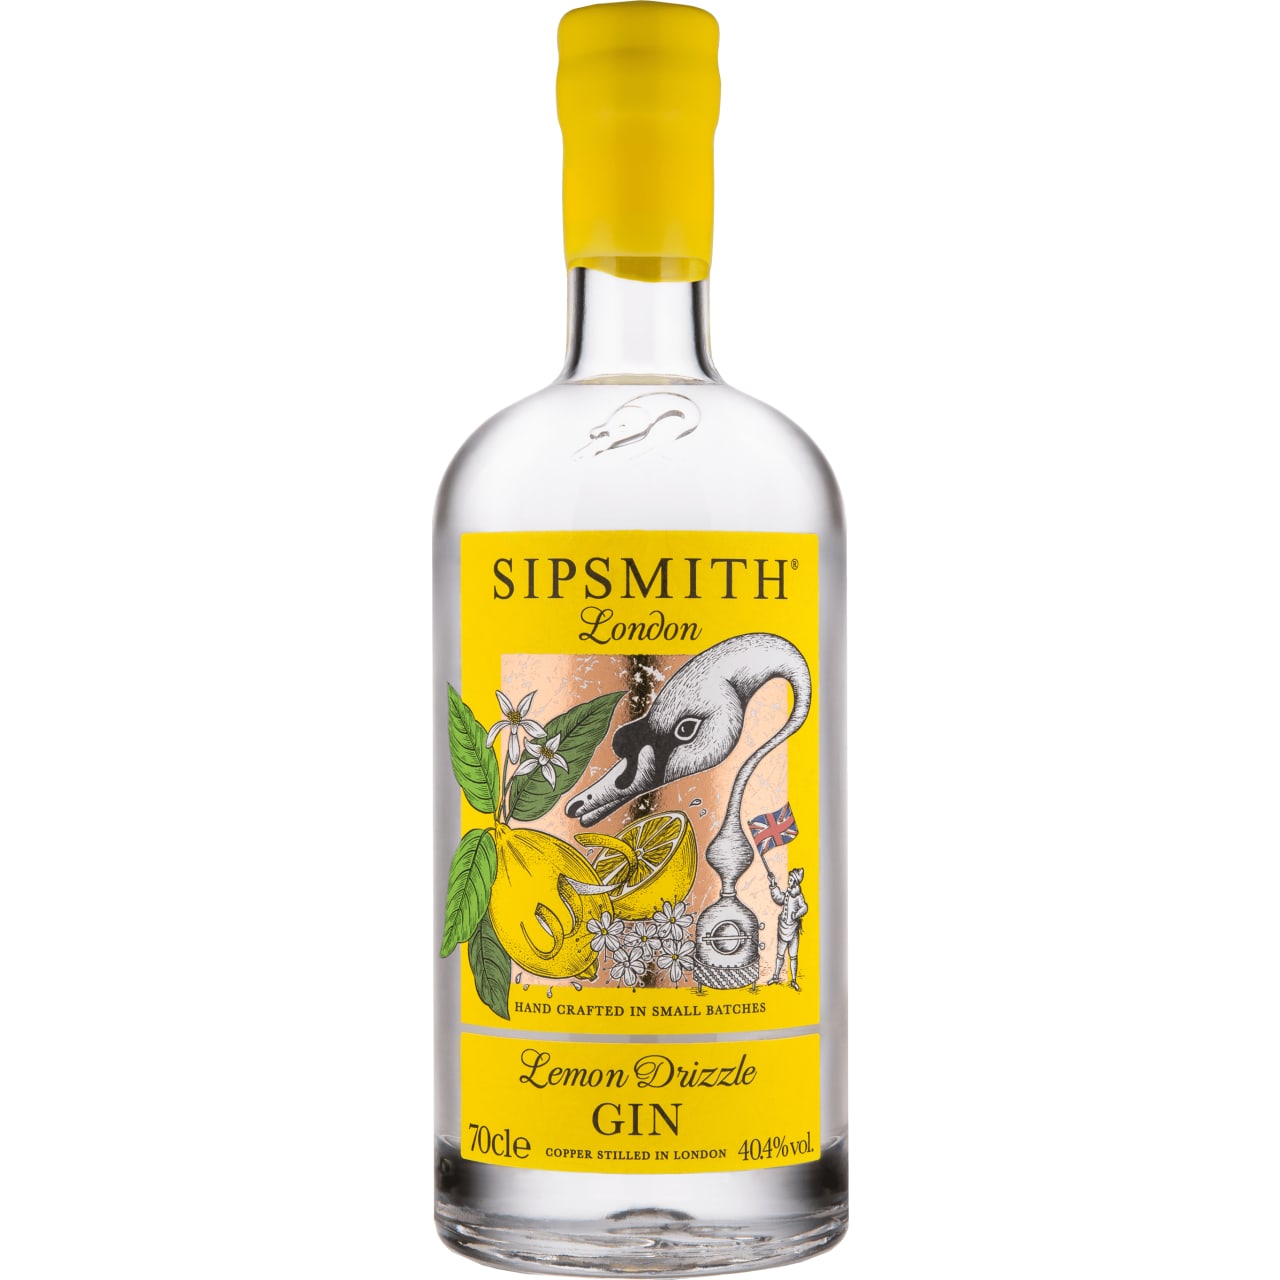 Product Image - Sipsmith Lemon Drizzle Gin